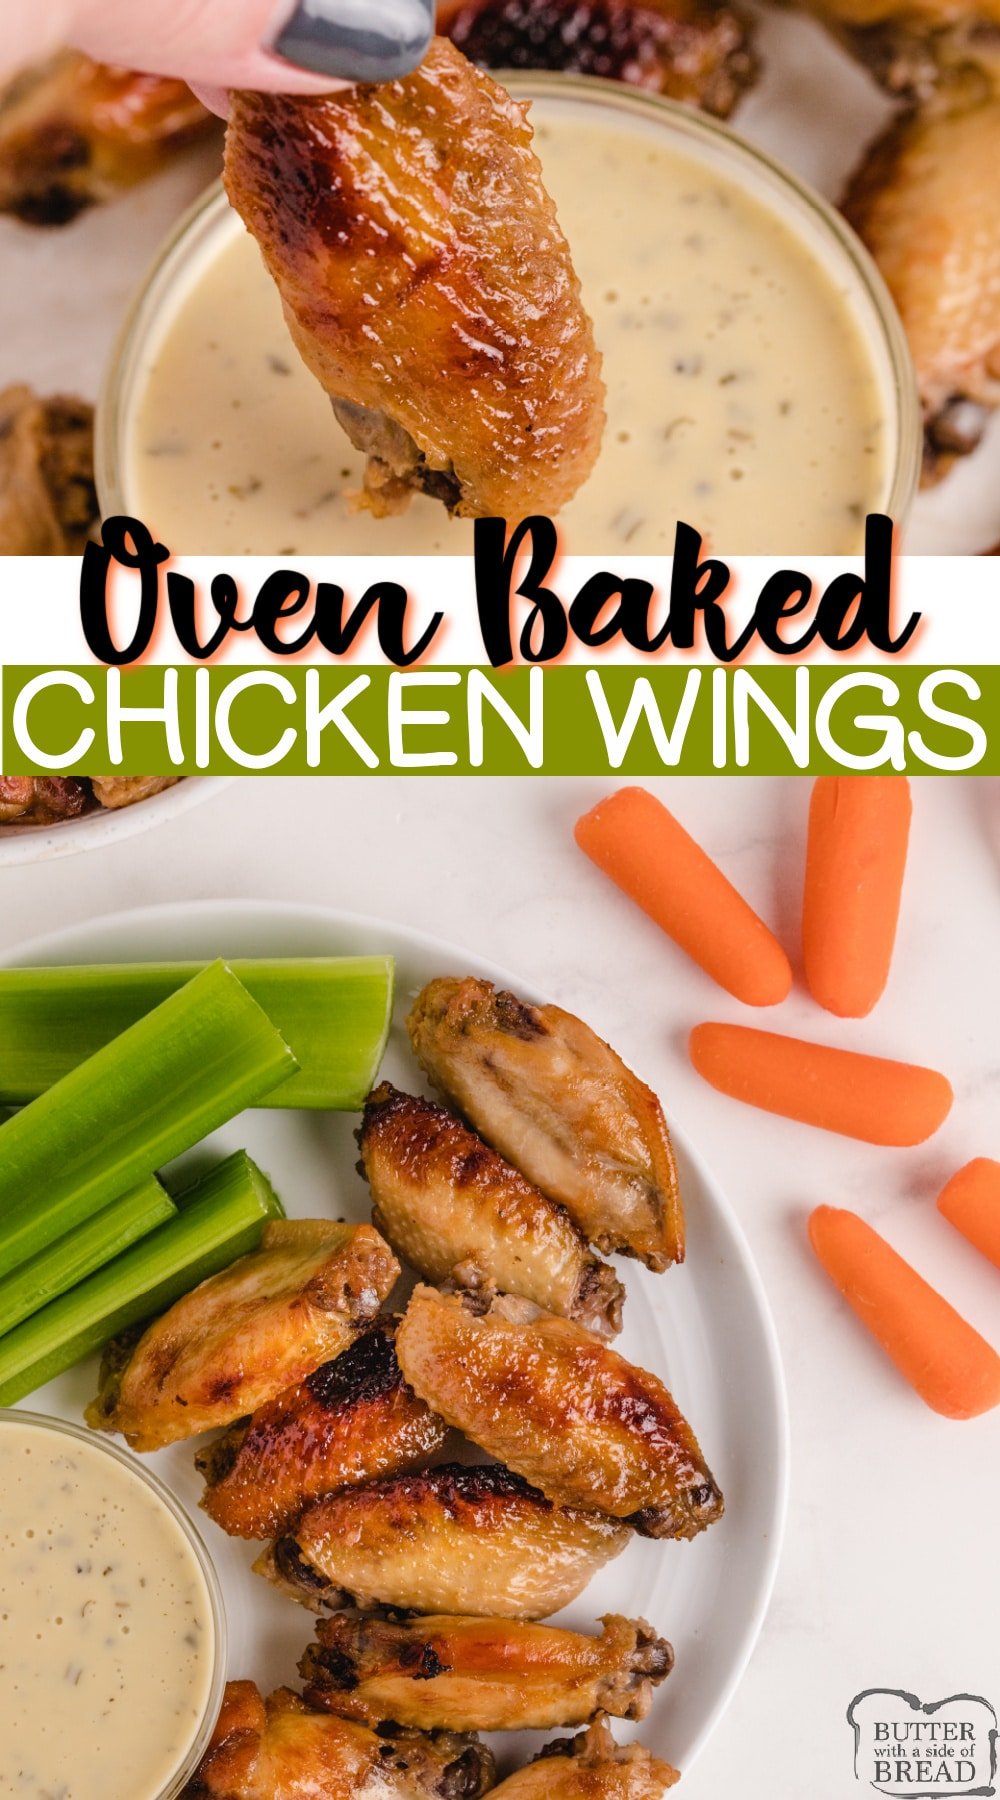 Oven Baked Chicken Wings are perfect for an appetizer, side dish or even the main course. These baked chicken wings are marinated overnight so they are tender, juicy and packed with flavor!